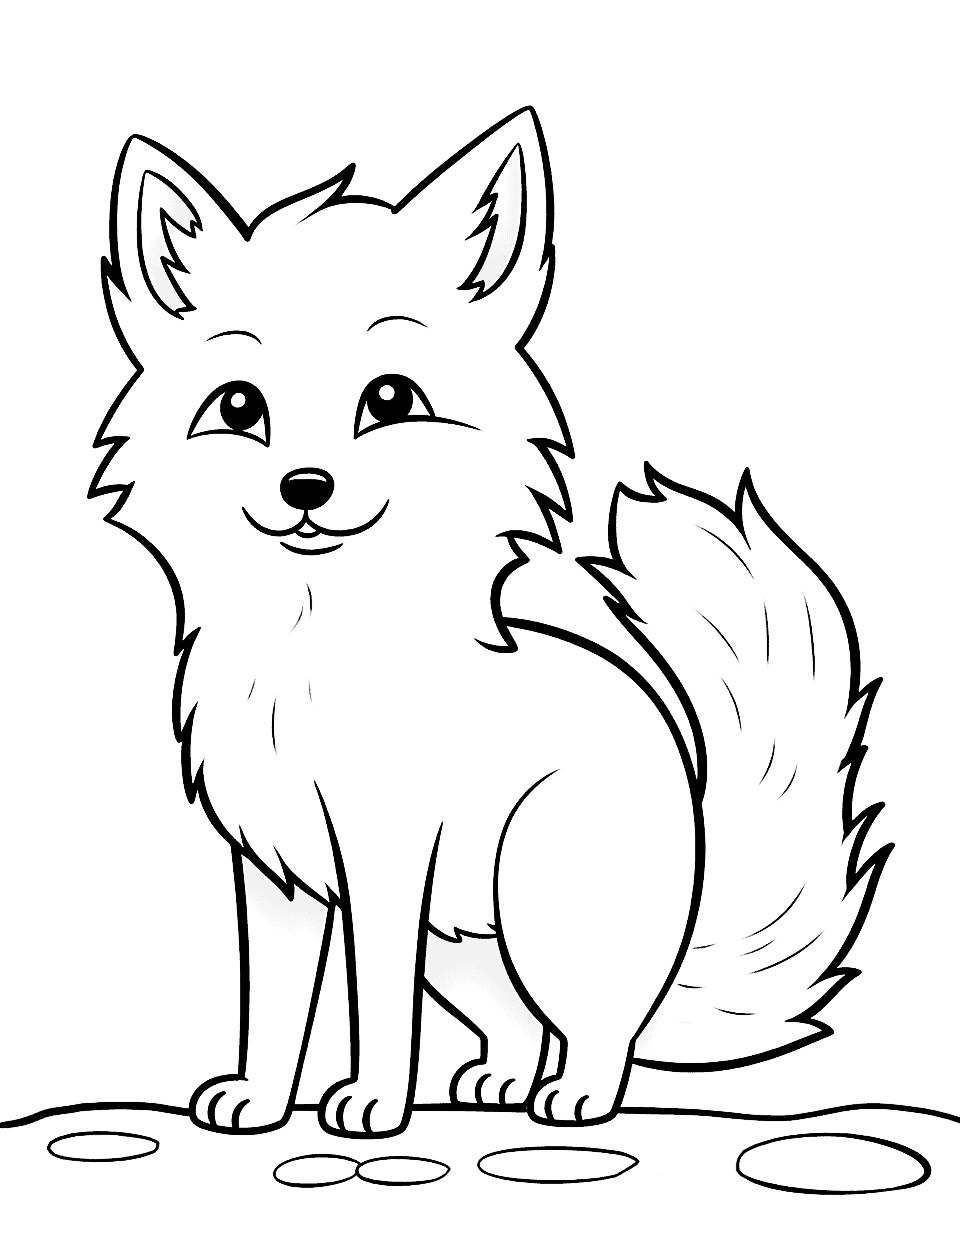 Majestic Arctic Fox Coloring Page - The white, fluffy Arctic fox, standing tall.